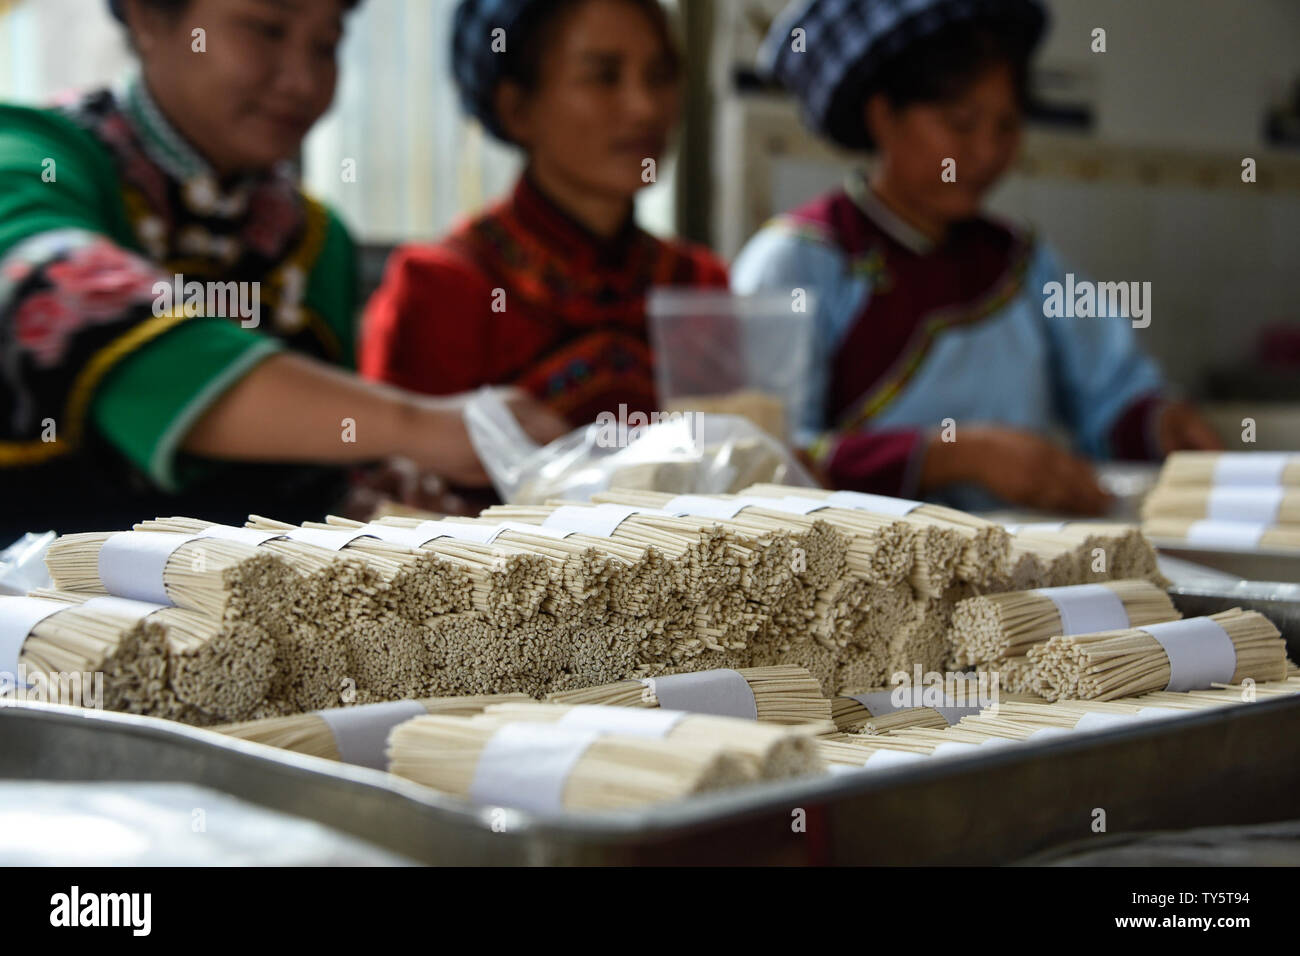 June 26, 2019 - Guizhou, Guizhou, China - Guizhou, China - June 26 2019:Saltwater noodles are one of the specialties of baoshu village, shitun town, wangmo county, buyi and miao autonomous prefecture, southwest guizhou province. It originated in qianlong period and has a history of more than 200 years.Saltwater noodles are called health food by local people in buyi. They are soft, delicious, lube, nutritious and easy to digest.Bao shu is an ordinary village with more than 200 families, all of whom make noodles for a living.Making Saltwater noodles have become not only the name card of the vill Stock Photo